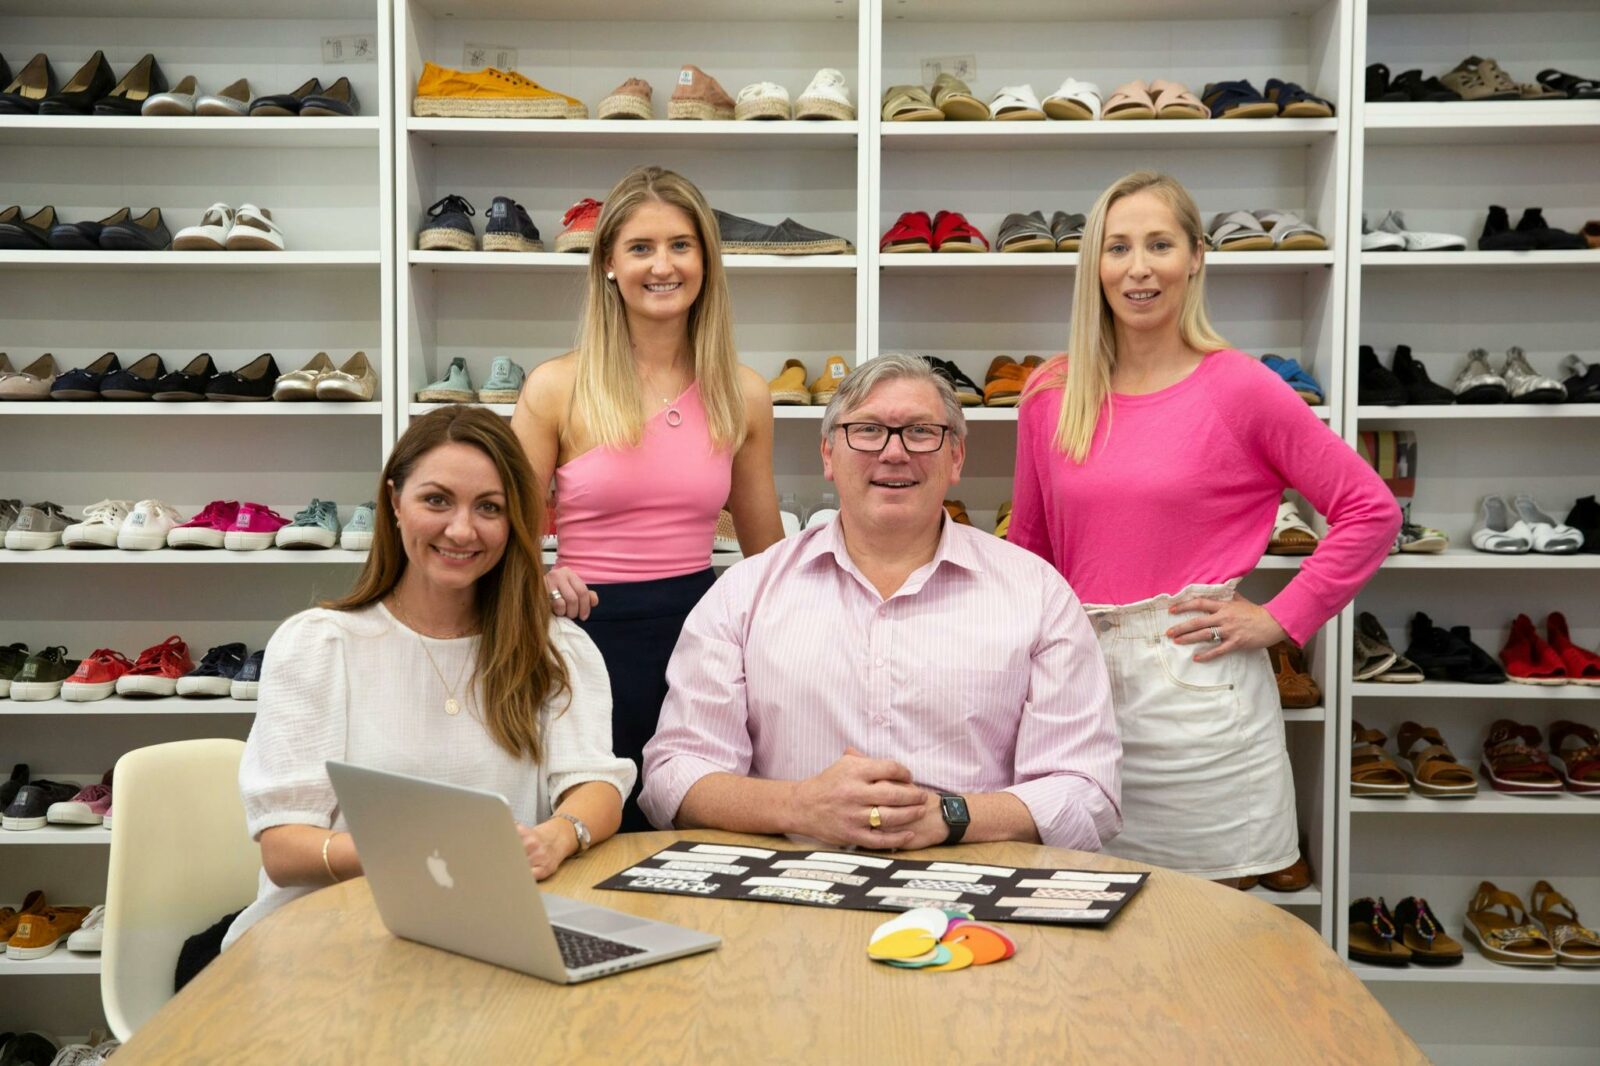 Three women and one man smile in front of shoe displays